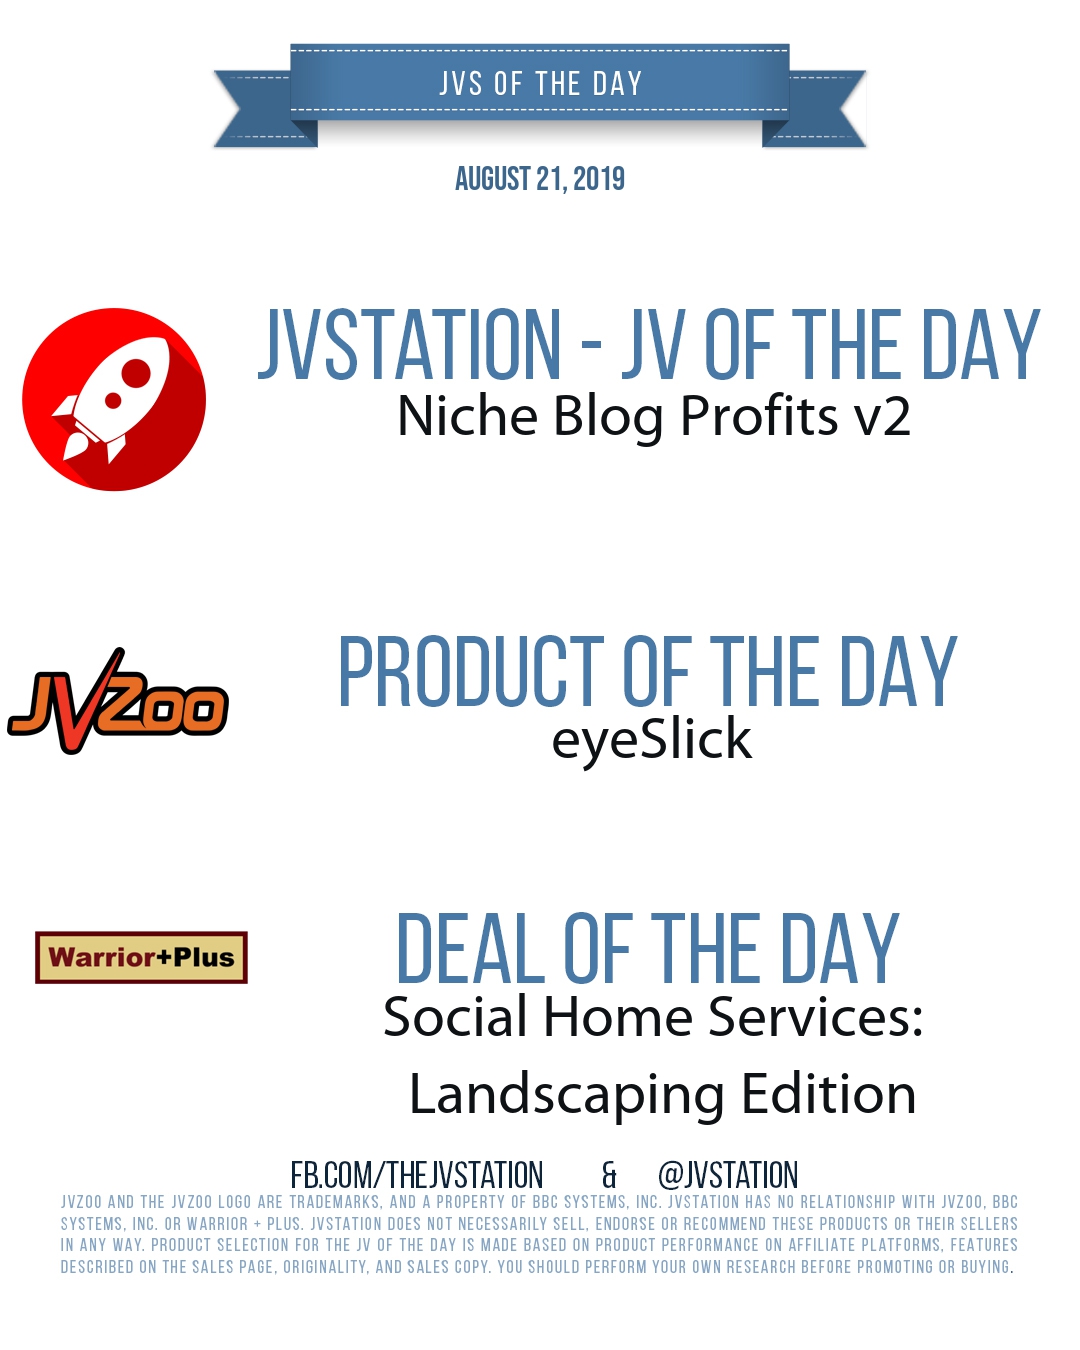 JVs of the day - August 21, 2019